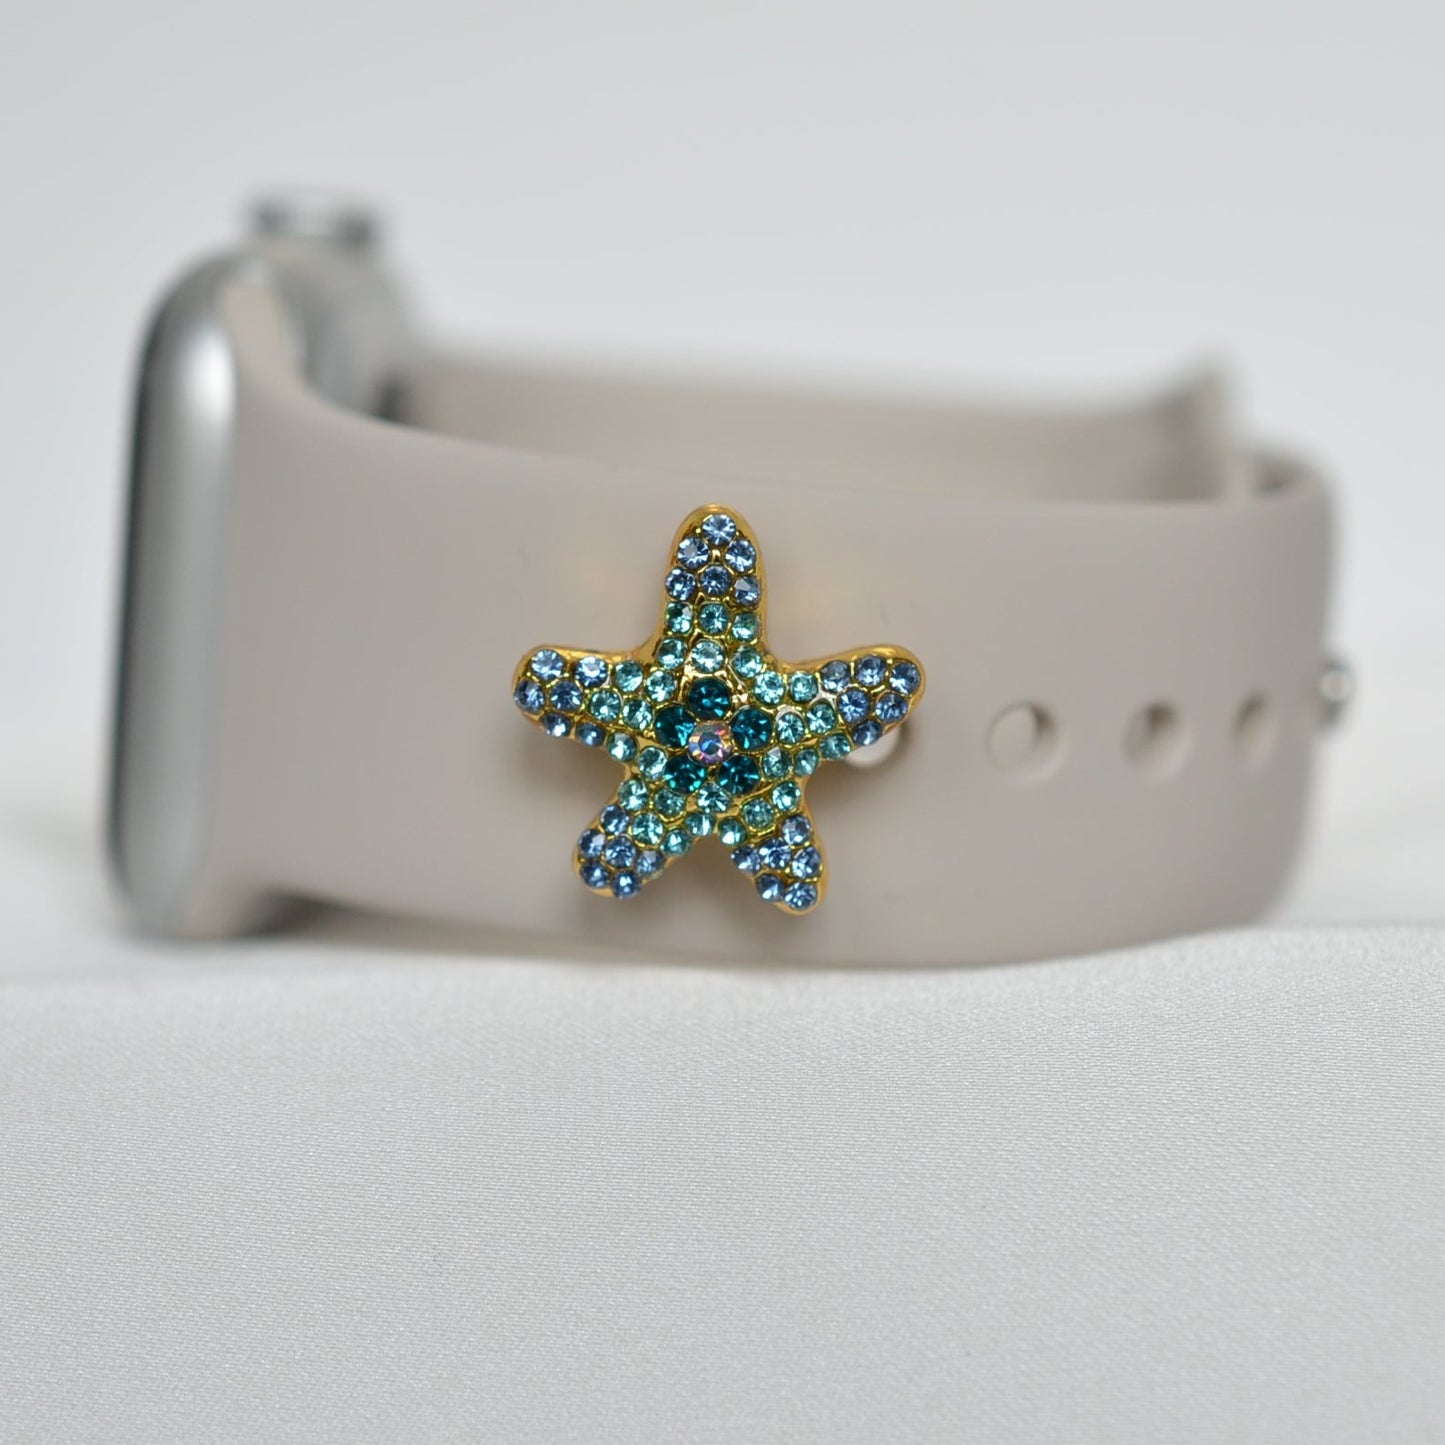 Starfish Charm Belts, Bags, Watch Bands